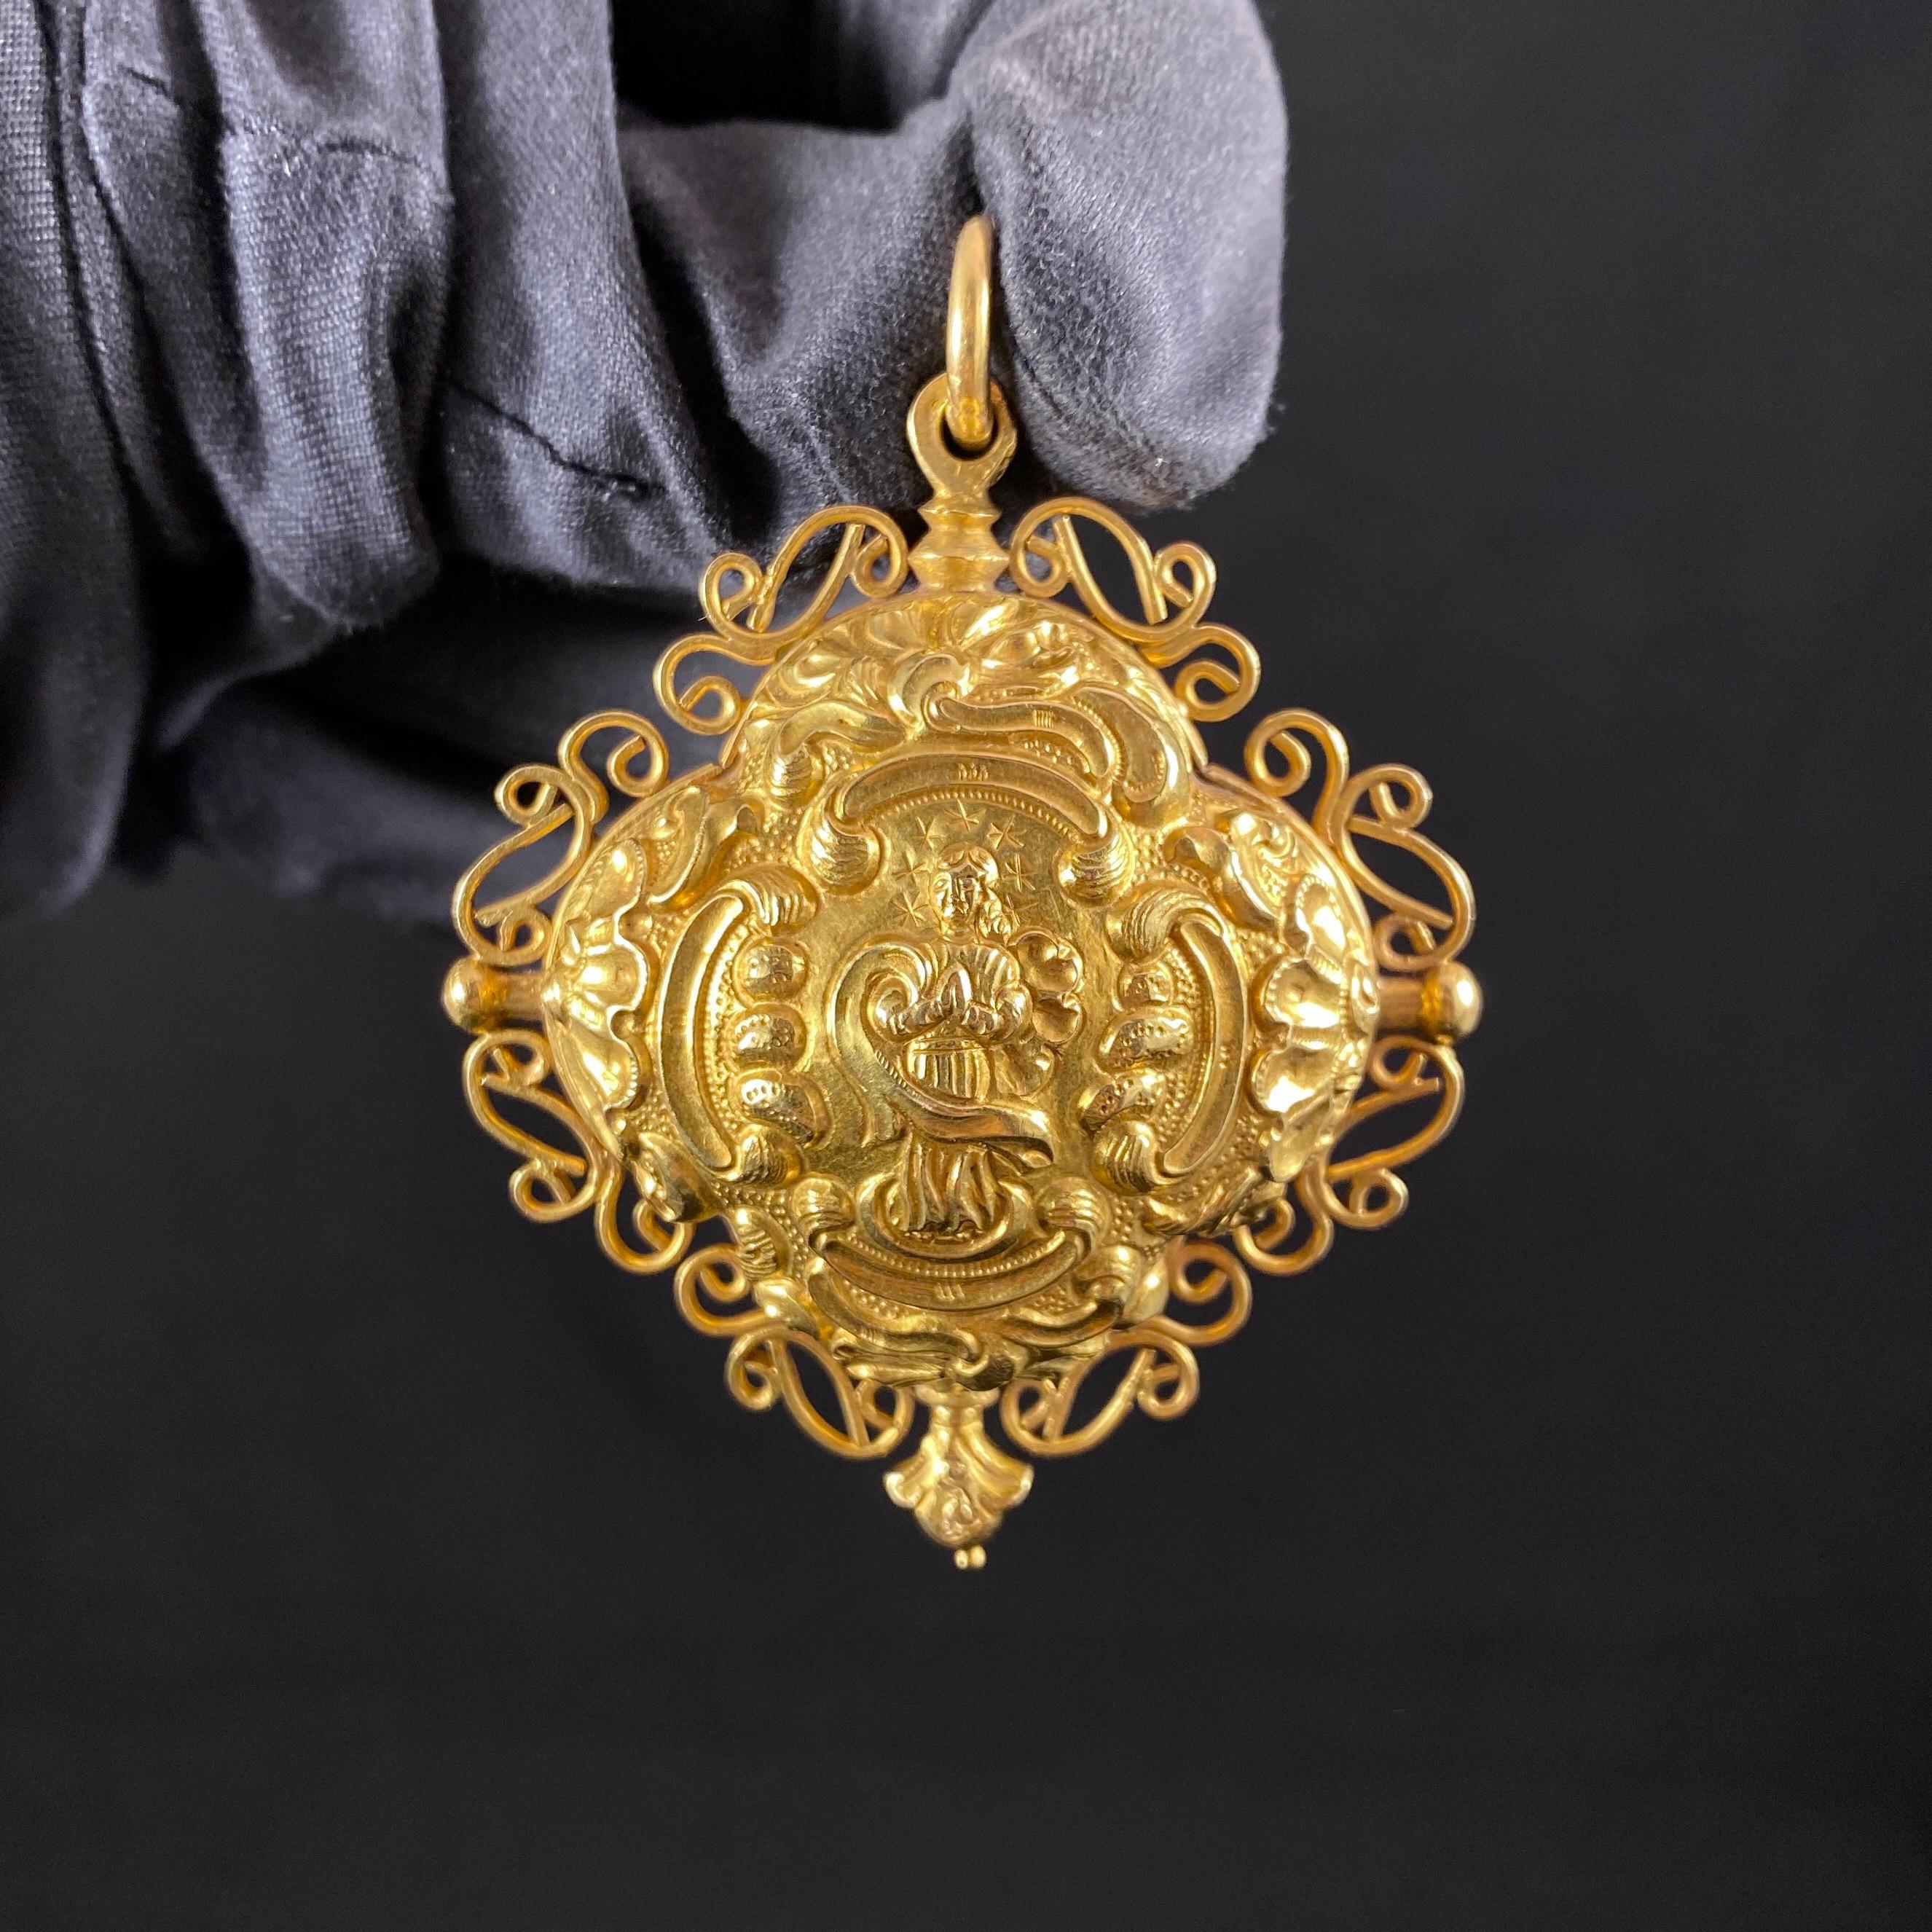 Antique Georgian 18th century religious reliquary locket in yellow gold, Portuguese. With Christian motifs in relief and chiseled decoration, depicting the Immaculate Conception of the Virgin Mary and a Rosary at the back. This Baroque jewel of